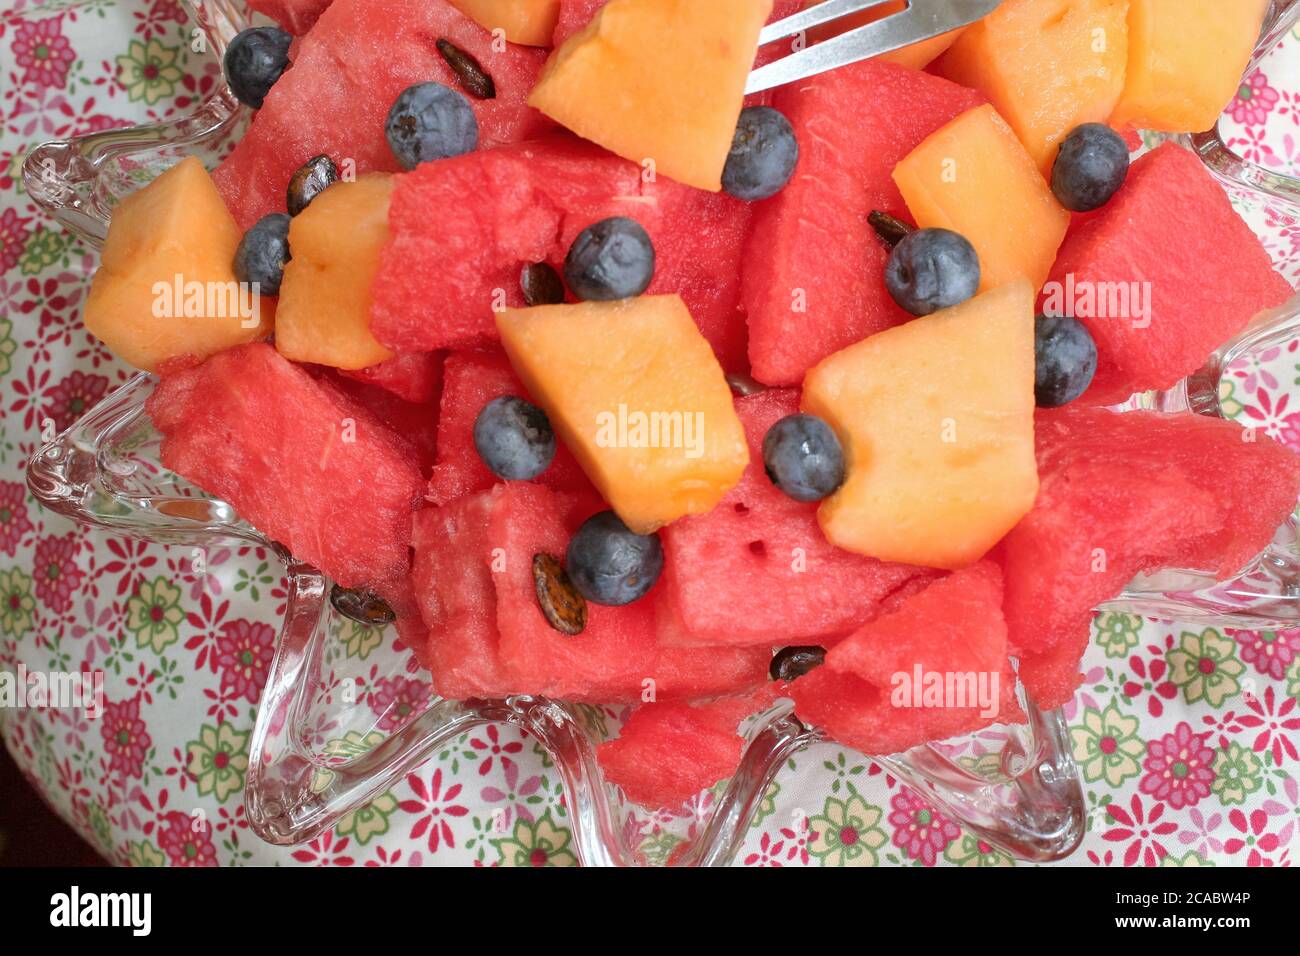 Cantaloupe, watermelon and blueberries in a glass dish Stock Photo